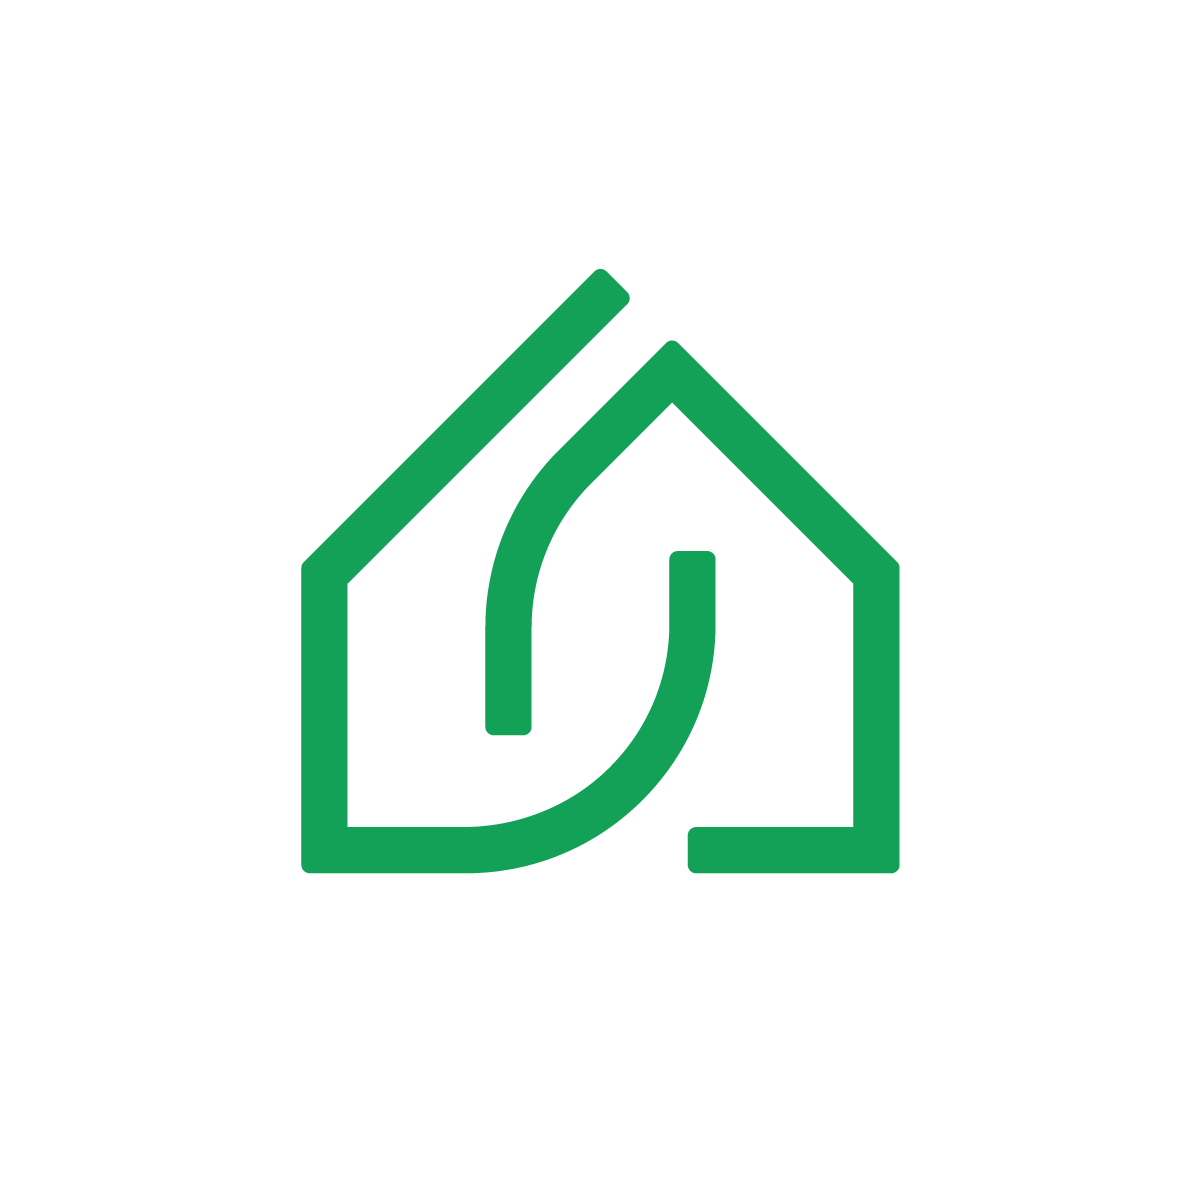 Eco House Logo: Minimalist design with two lines forming a house icon